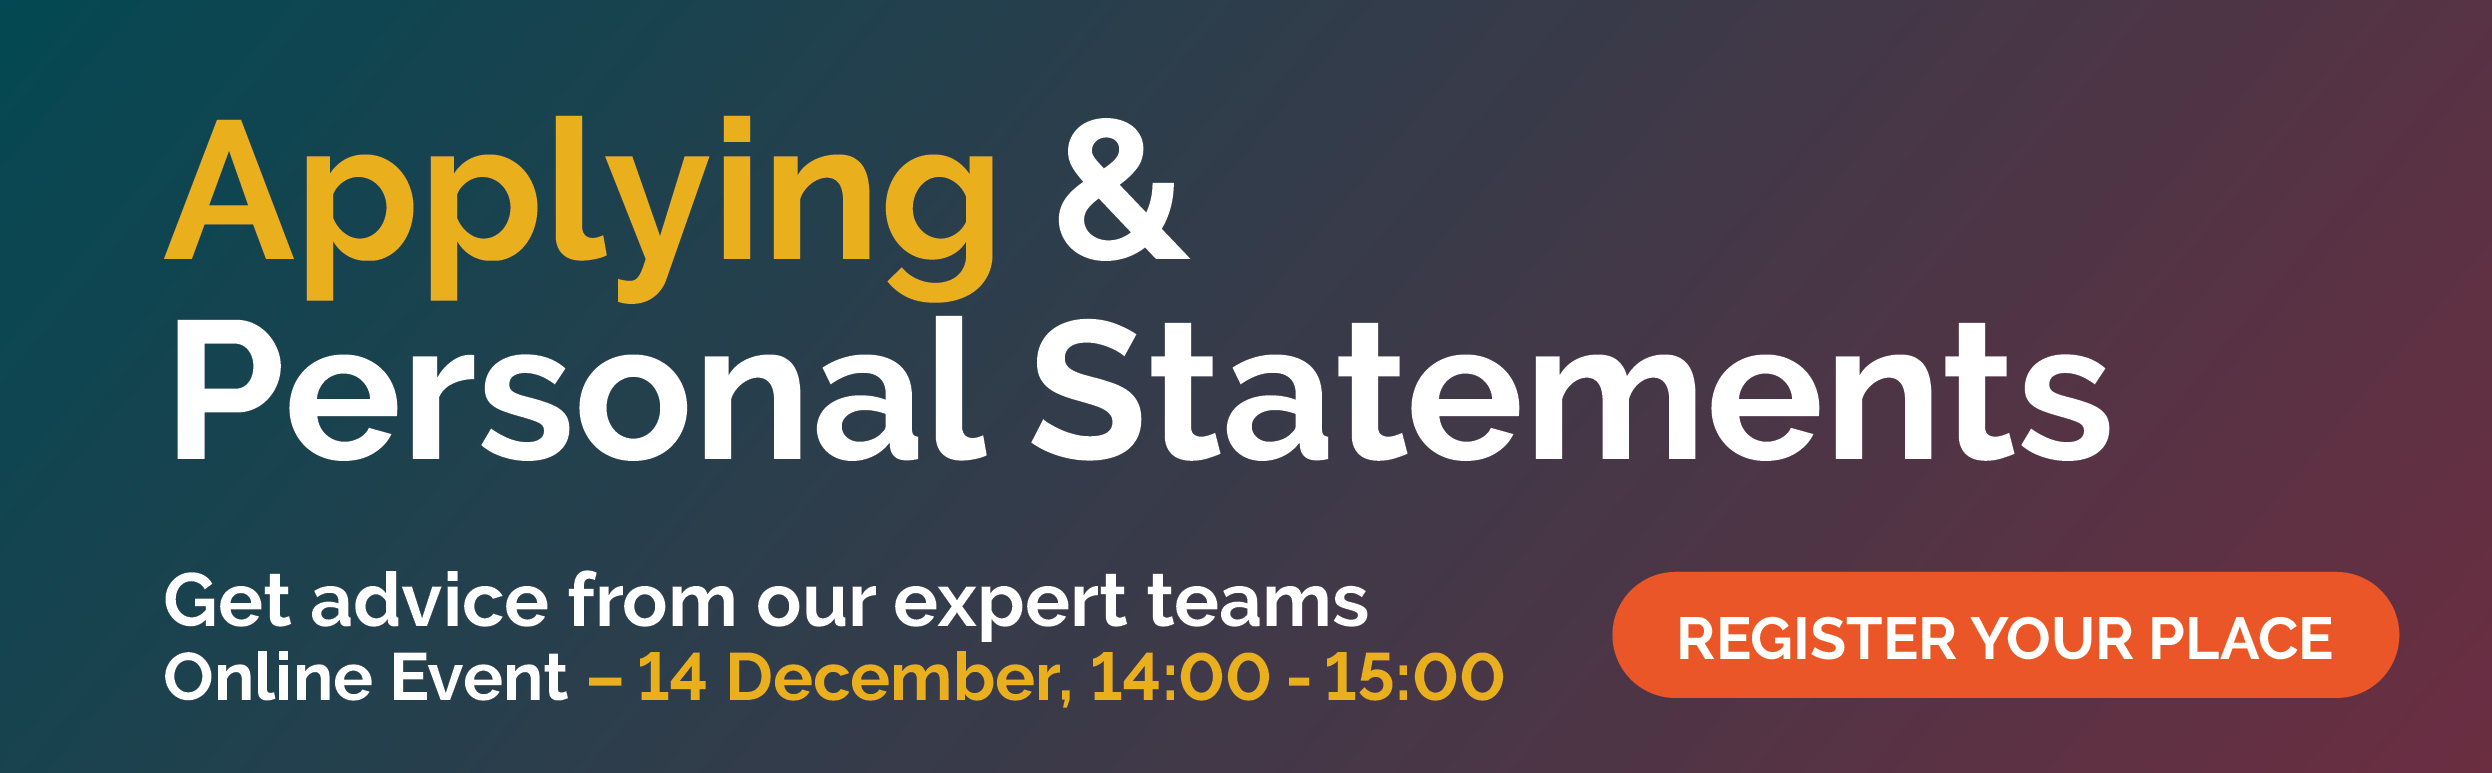 Applying and personal statements. Get advice from our expert teams. Register now